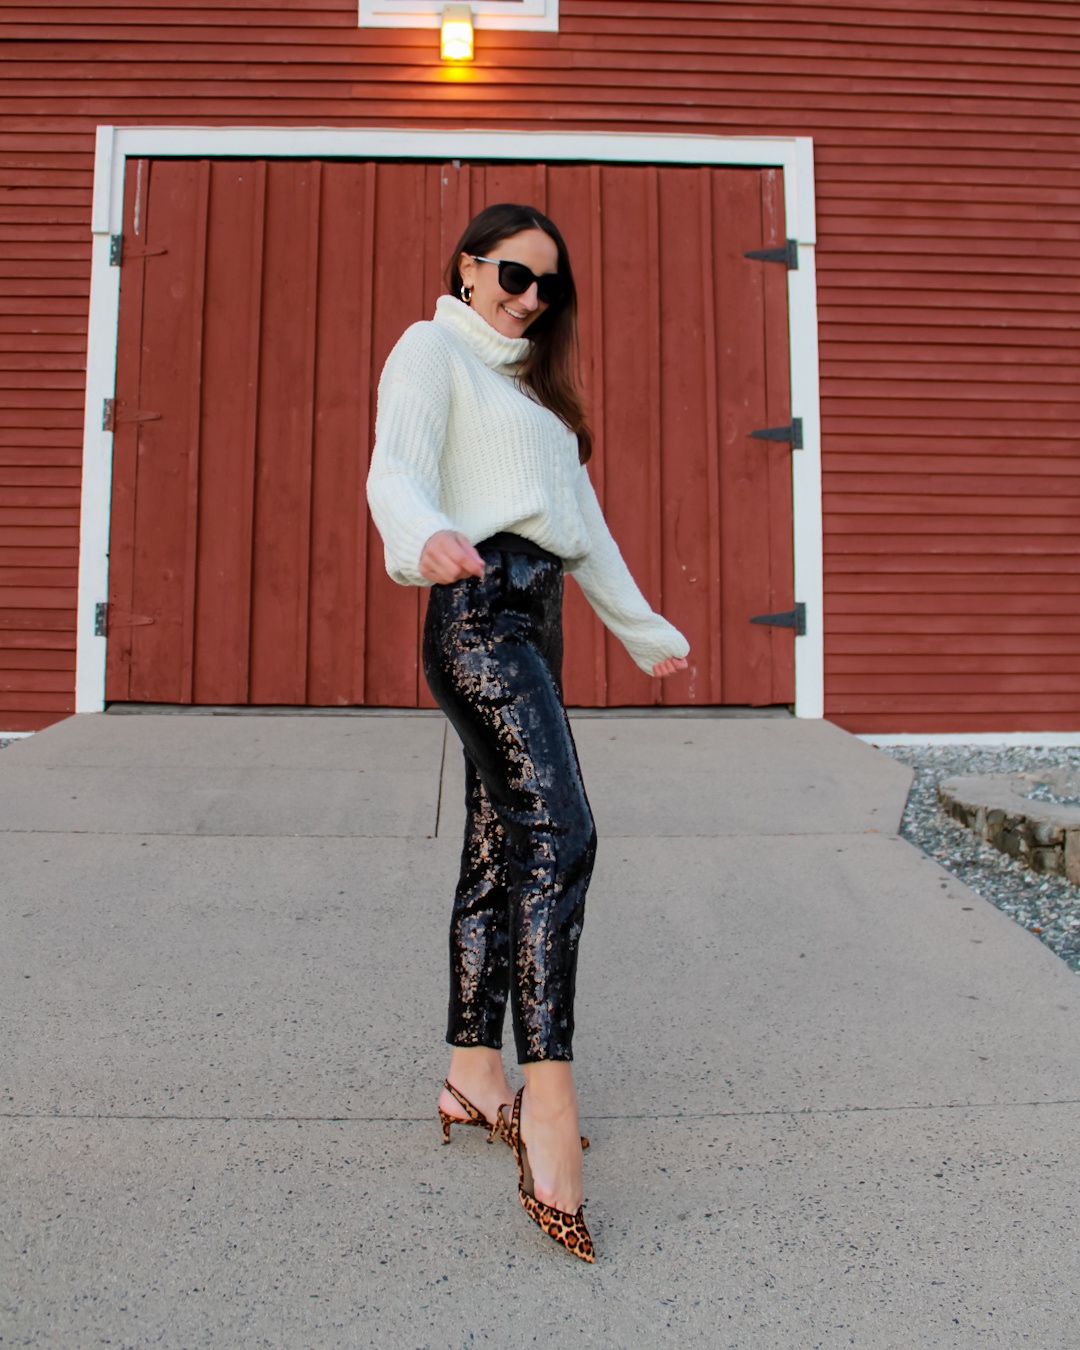 Black Sequin Leggings with Sequin Pants Outfits (3 ideas & outfits)